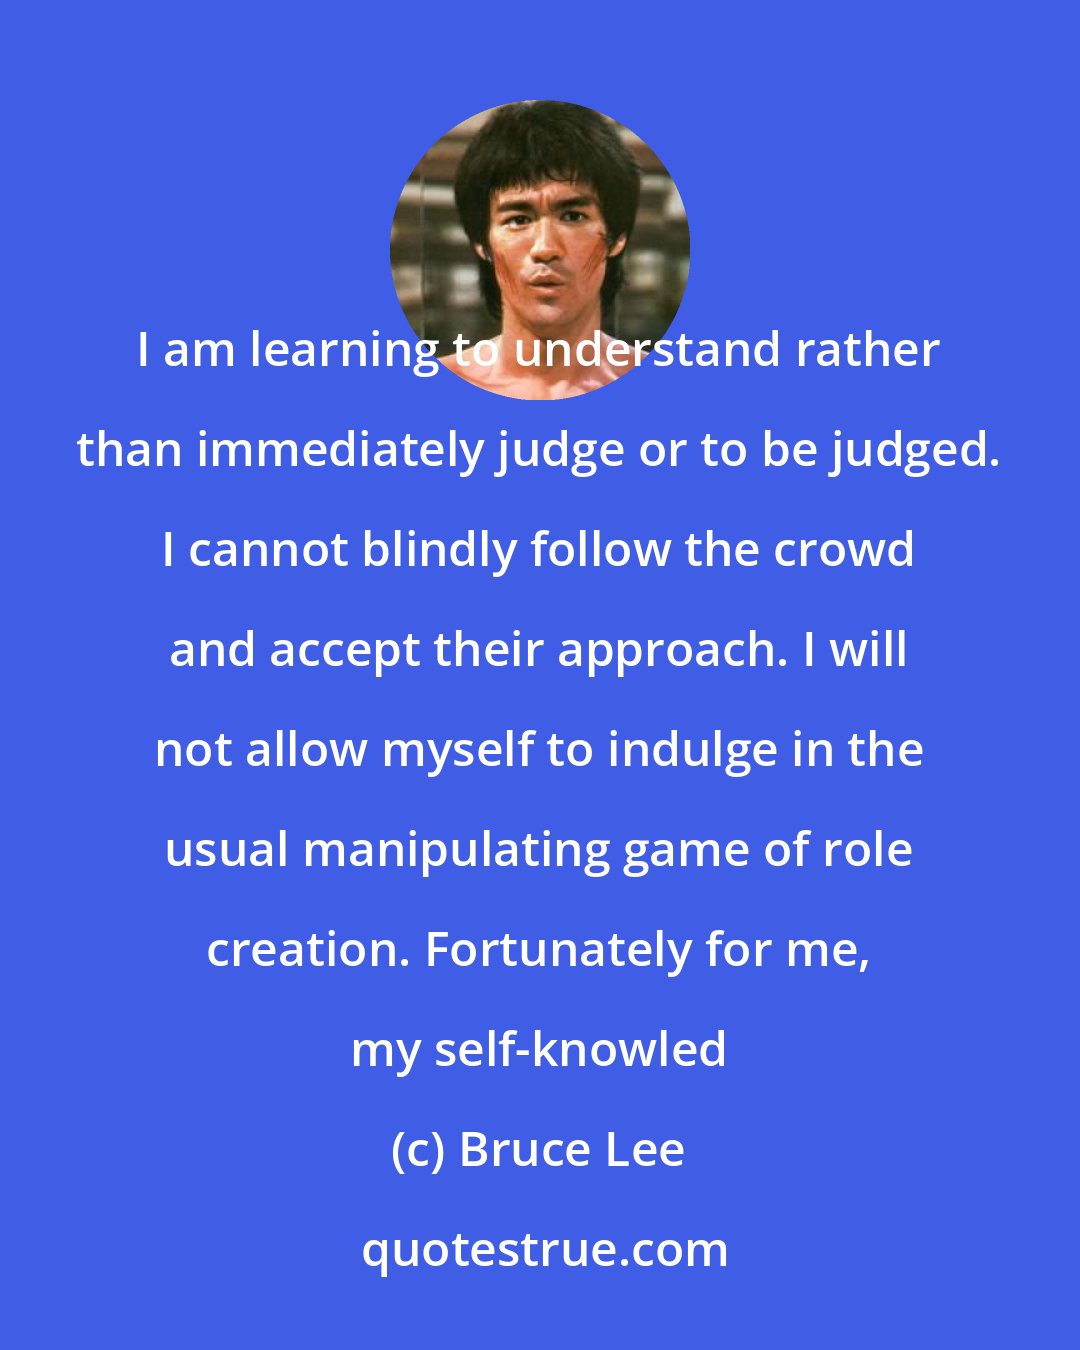 Bruce Lee: I am learning to understand rather than immediately judge or to be judged. I cannot blindly follow the crowd and accept their approach. I will not allow myself to indulge in the usual manipulating game of role creation. Fortunately for me, my self-knowled